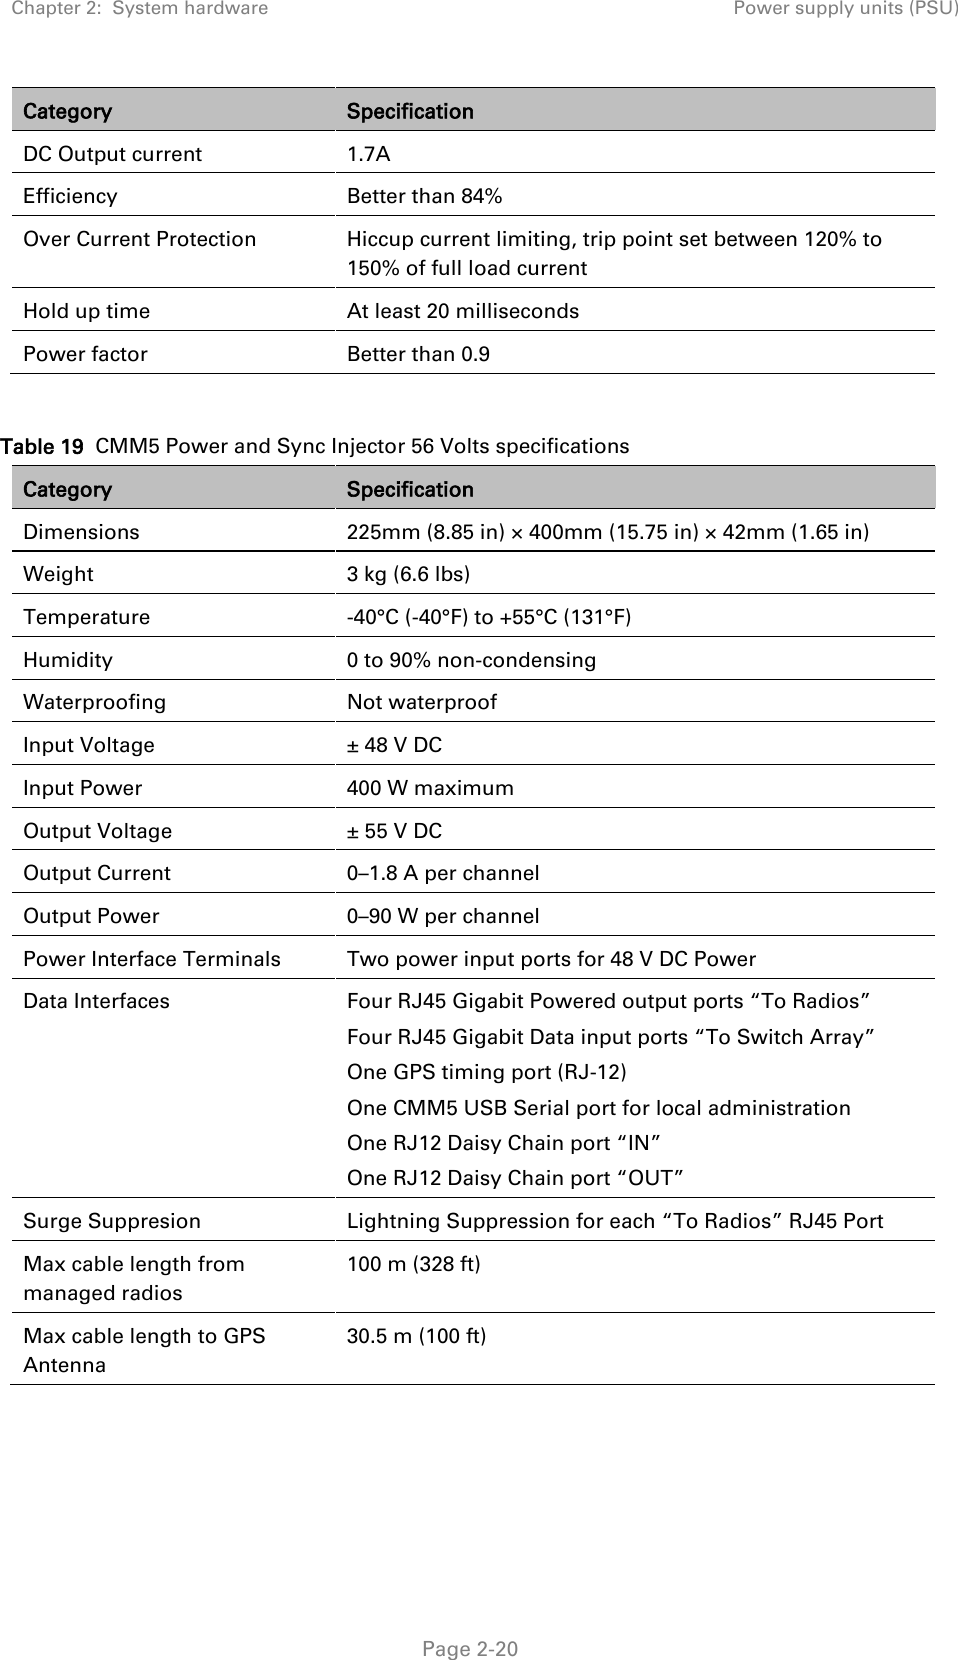 Chapter 2:  System hardware Power supply units (PSU)   Page 2-20 Category Specification DC Output current 1.7A Efficiency Better than 84% Over Current Protection Hiccup current limiting, trip point set between 120% to 150% of full load current Hold up time  At least 20 milliseconds Power factor Better than 0.9  Table 19  CMM5 Power and Sync Injector 56 Volts specifications Category Specification Dimensions 225mm (8.85 in) × 400mm (15.75 in) × 42mm (1.65 in) Weight   3 kg (6.6 lbs) Temperature   -40°C (-40°F) to +55°C (131°F) Humidity  0 to 90% non-condensing Waterproofing   Not waterproof Input Voltage  ± 48 V DC Input Power 400 W maximum Output Voltage  ± 55 V DC Output Current  0–1.8 A per channel Output Power  0–90 W per channel Power Interface Terminals Two power input ports for 48 V DC Power Data Interfaces Four RJ45 Gigabit Powered output ports “To Radios” Four RJ45 Gigabit Data input ports “To Switch Array” One GPS timing port (RJ-12) One CMM5 USB Serial port for local administration One RJ12 Daisy Chain port “IN” One RJ12 Daisy Chain port “OUT” Surge Suppresion Lightning Suppression for each “To Radios” RJ45 Port Max cable length from managed radios 100 m (328 ft) Max cable length to GPS Antenna 30.5 m (100 ft)  